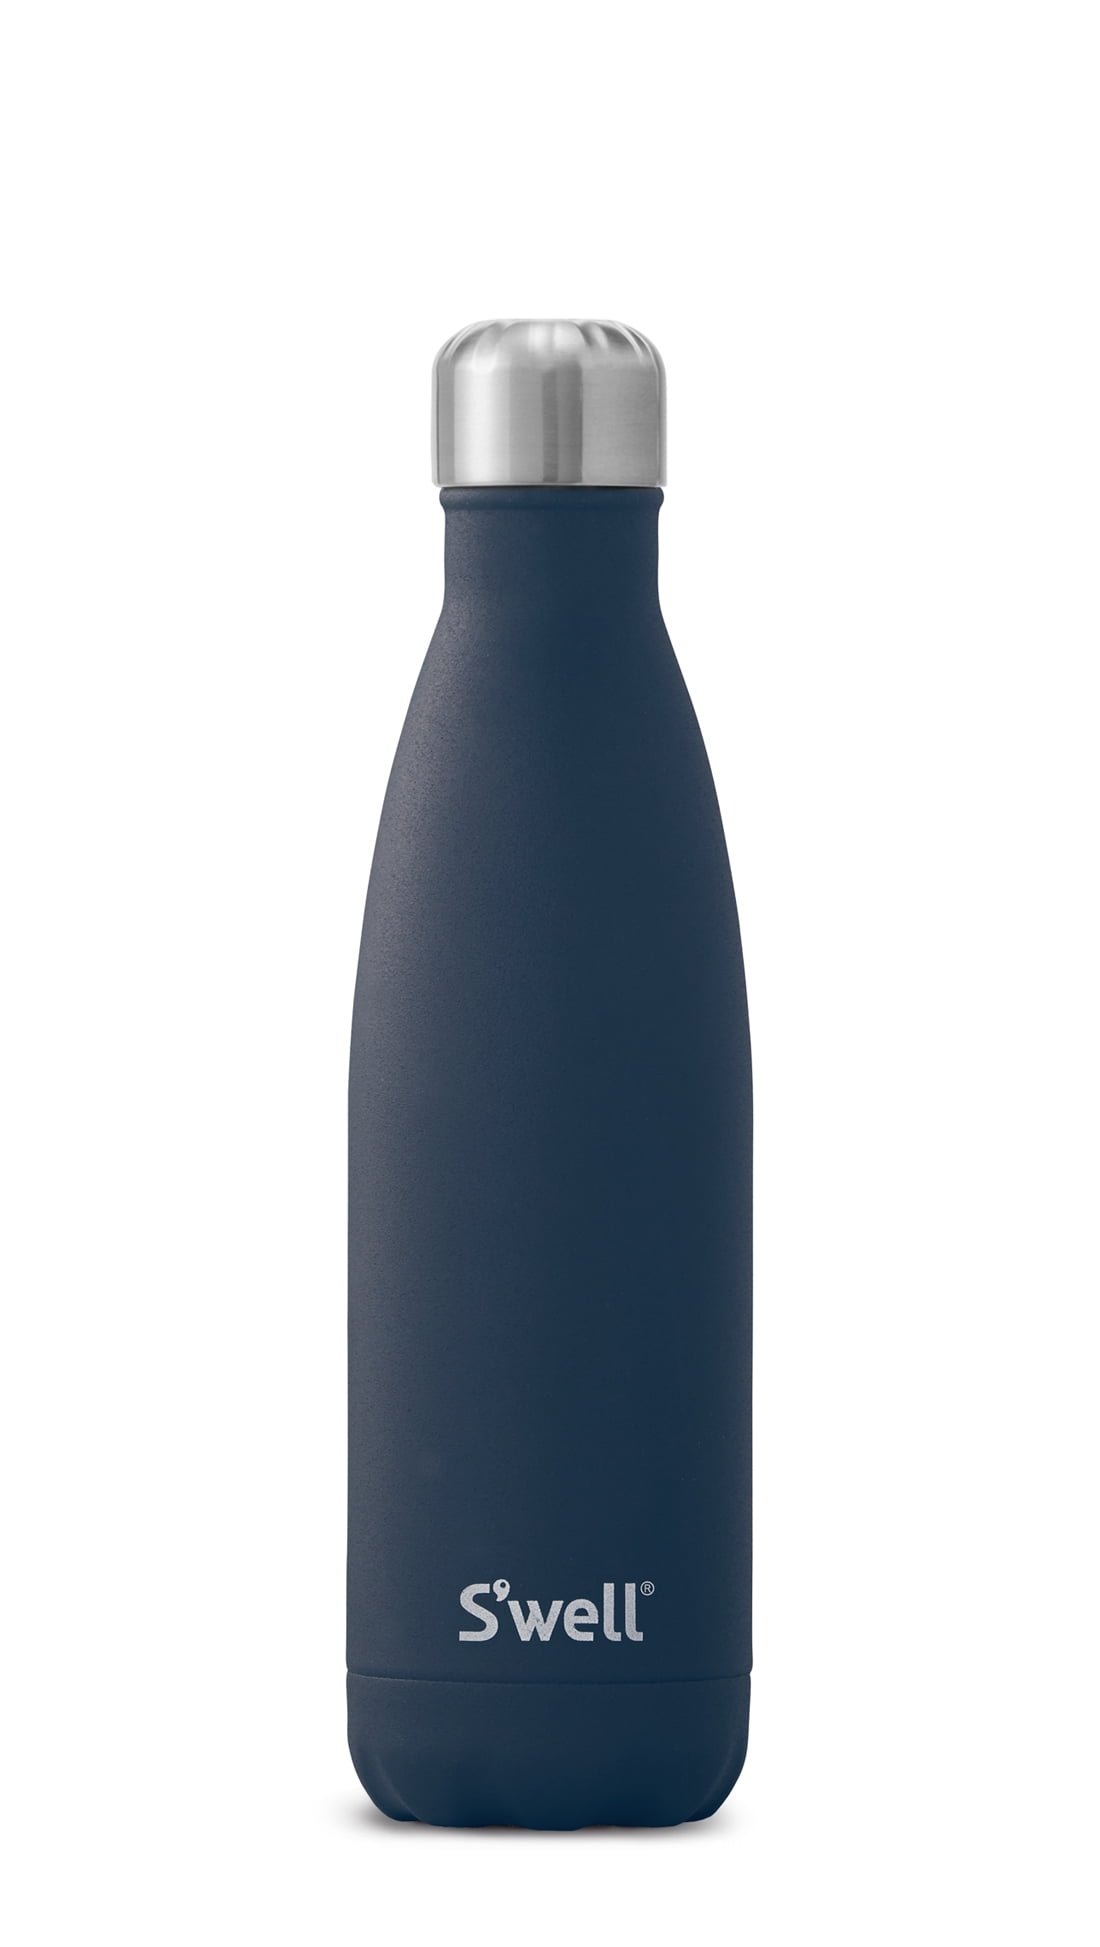 Perfect for the Go Triple-Layered Vacuum-Insulated Containers Keeps Drinks Cold for 36 Hours and Hot for 18 S'well Stainless Steel Water Bottle 17 Fl Oz BPA-Free Blue Granite 